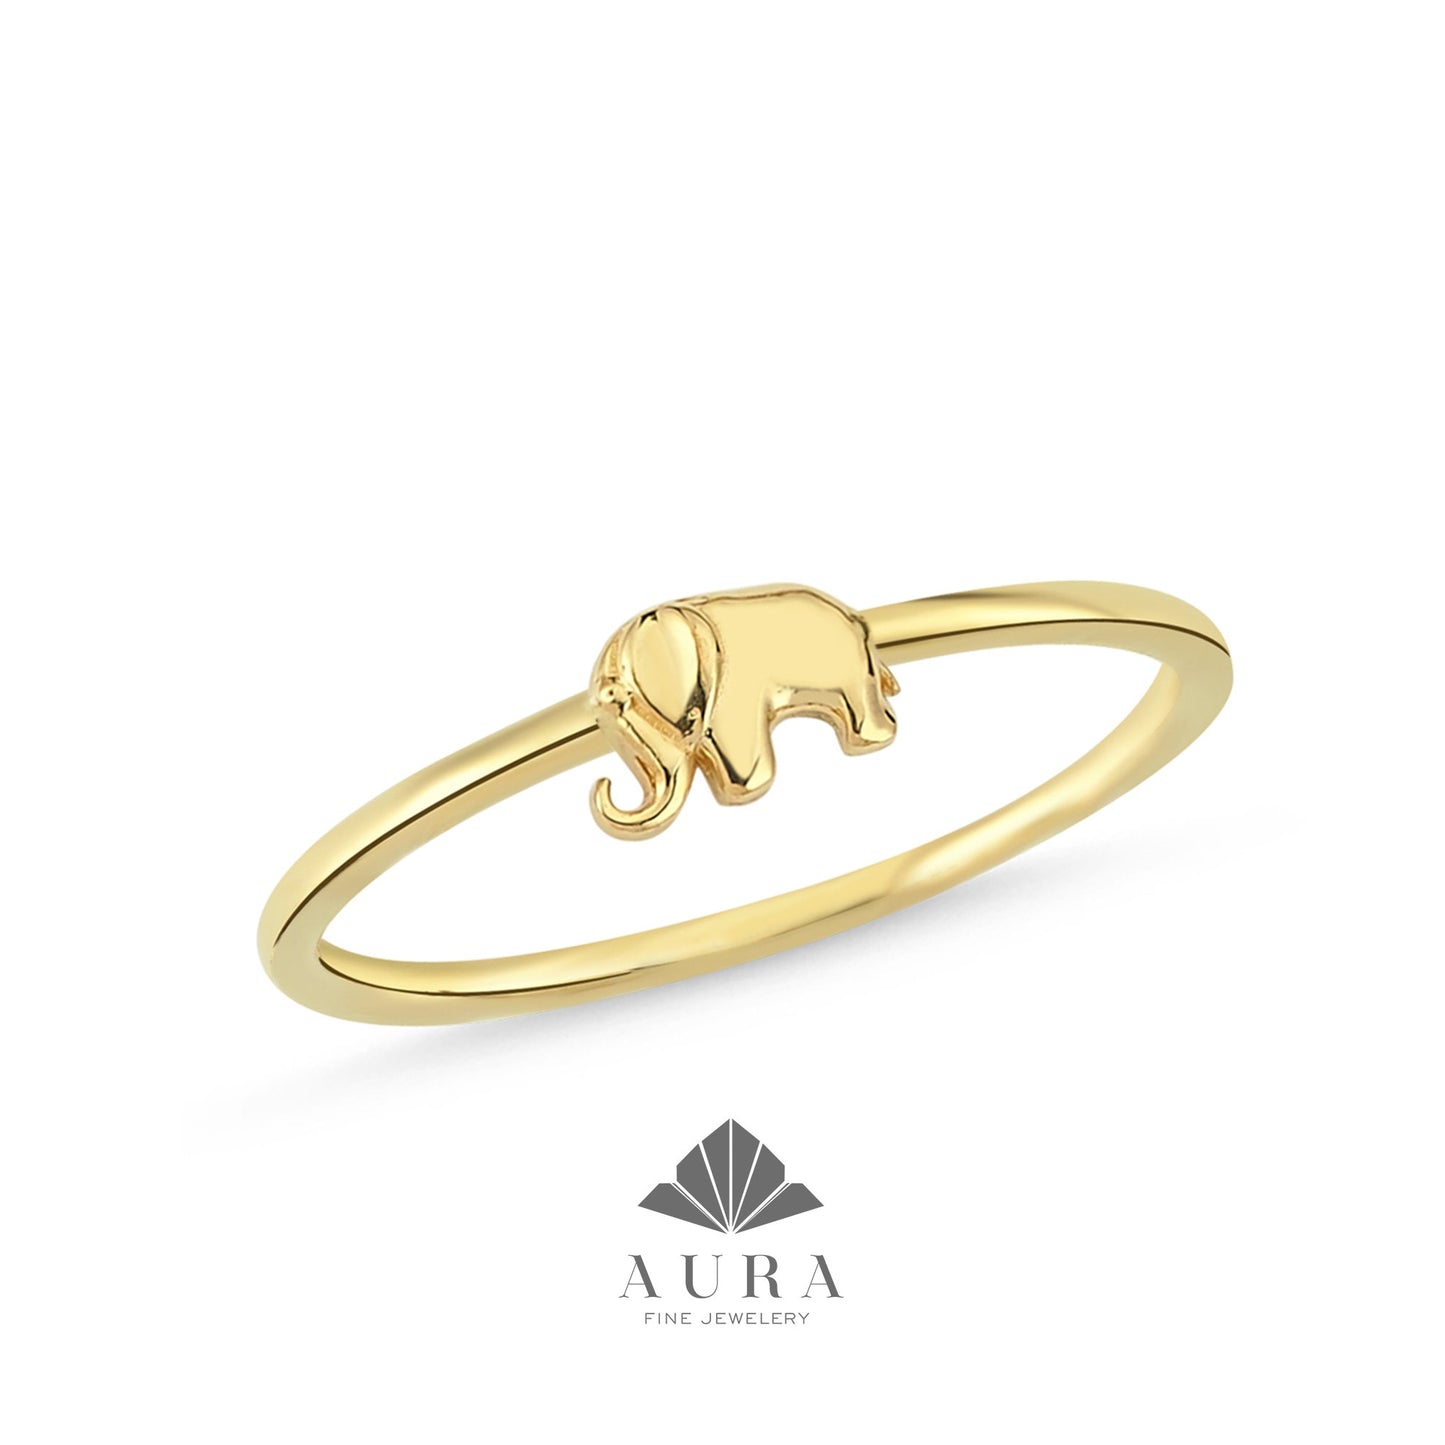 14K Gold Elephant Ring, Stacking Dainty Band, Animal Gold Ring, Dainty Luck Symbol, Handmade Statement Ring, Unique Pinky Ring